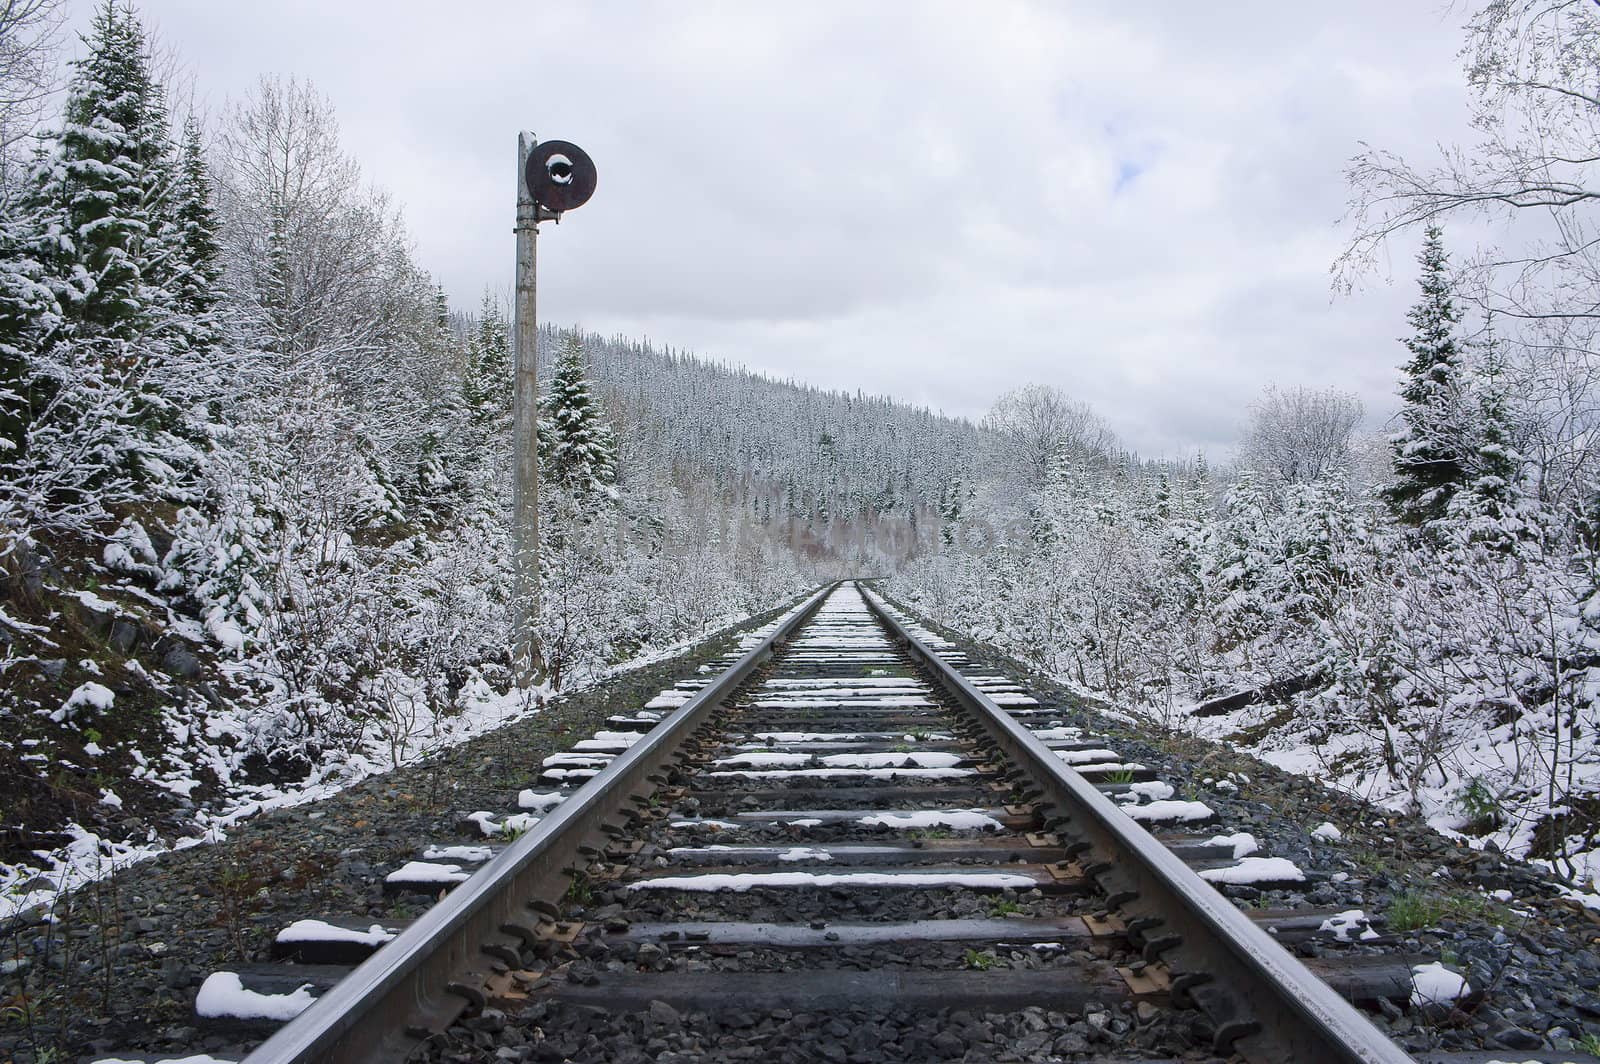 Railroad  receding into the distance, amongst snowy forest.